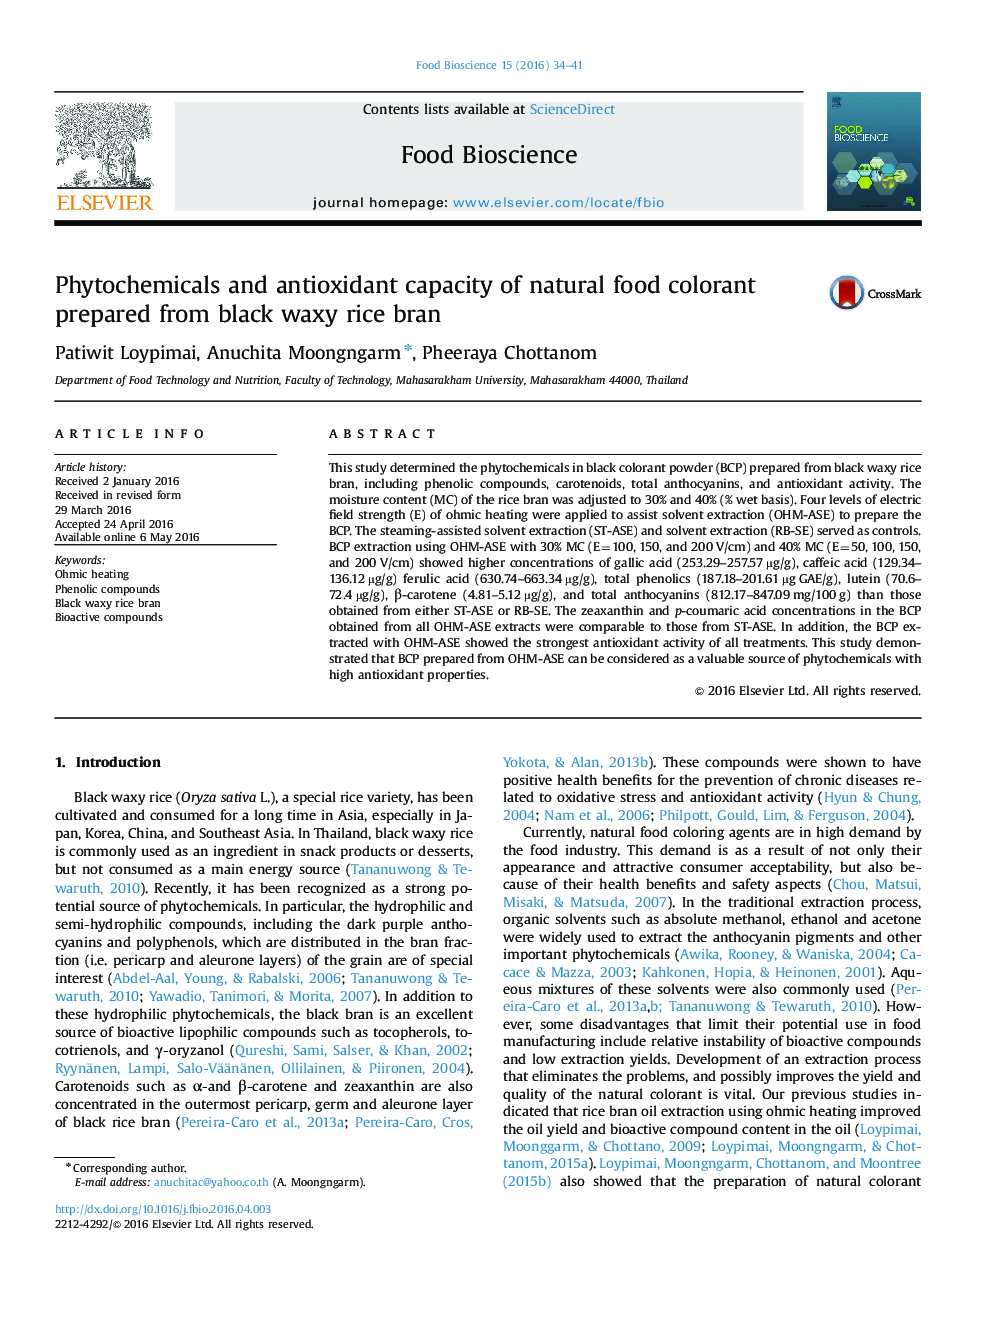 Phytochemicals and antioxidant capacity of natural food colorant prepared from black waxy rice bran